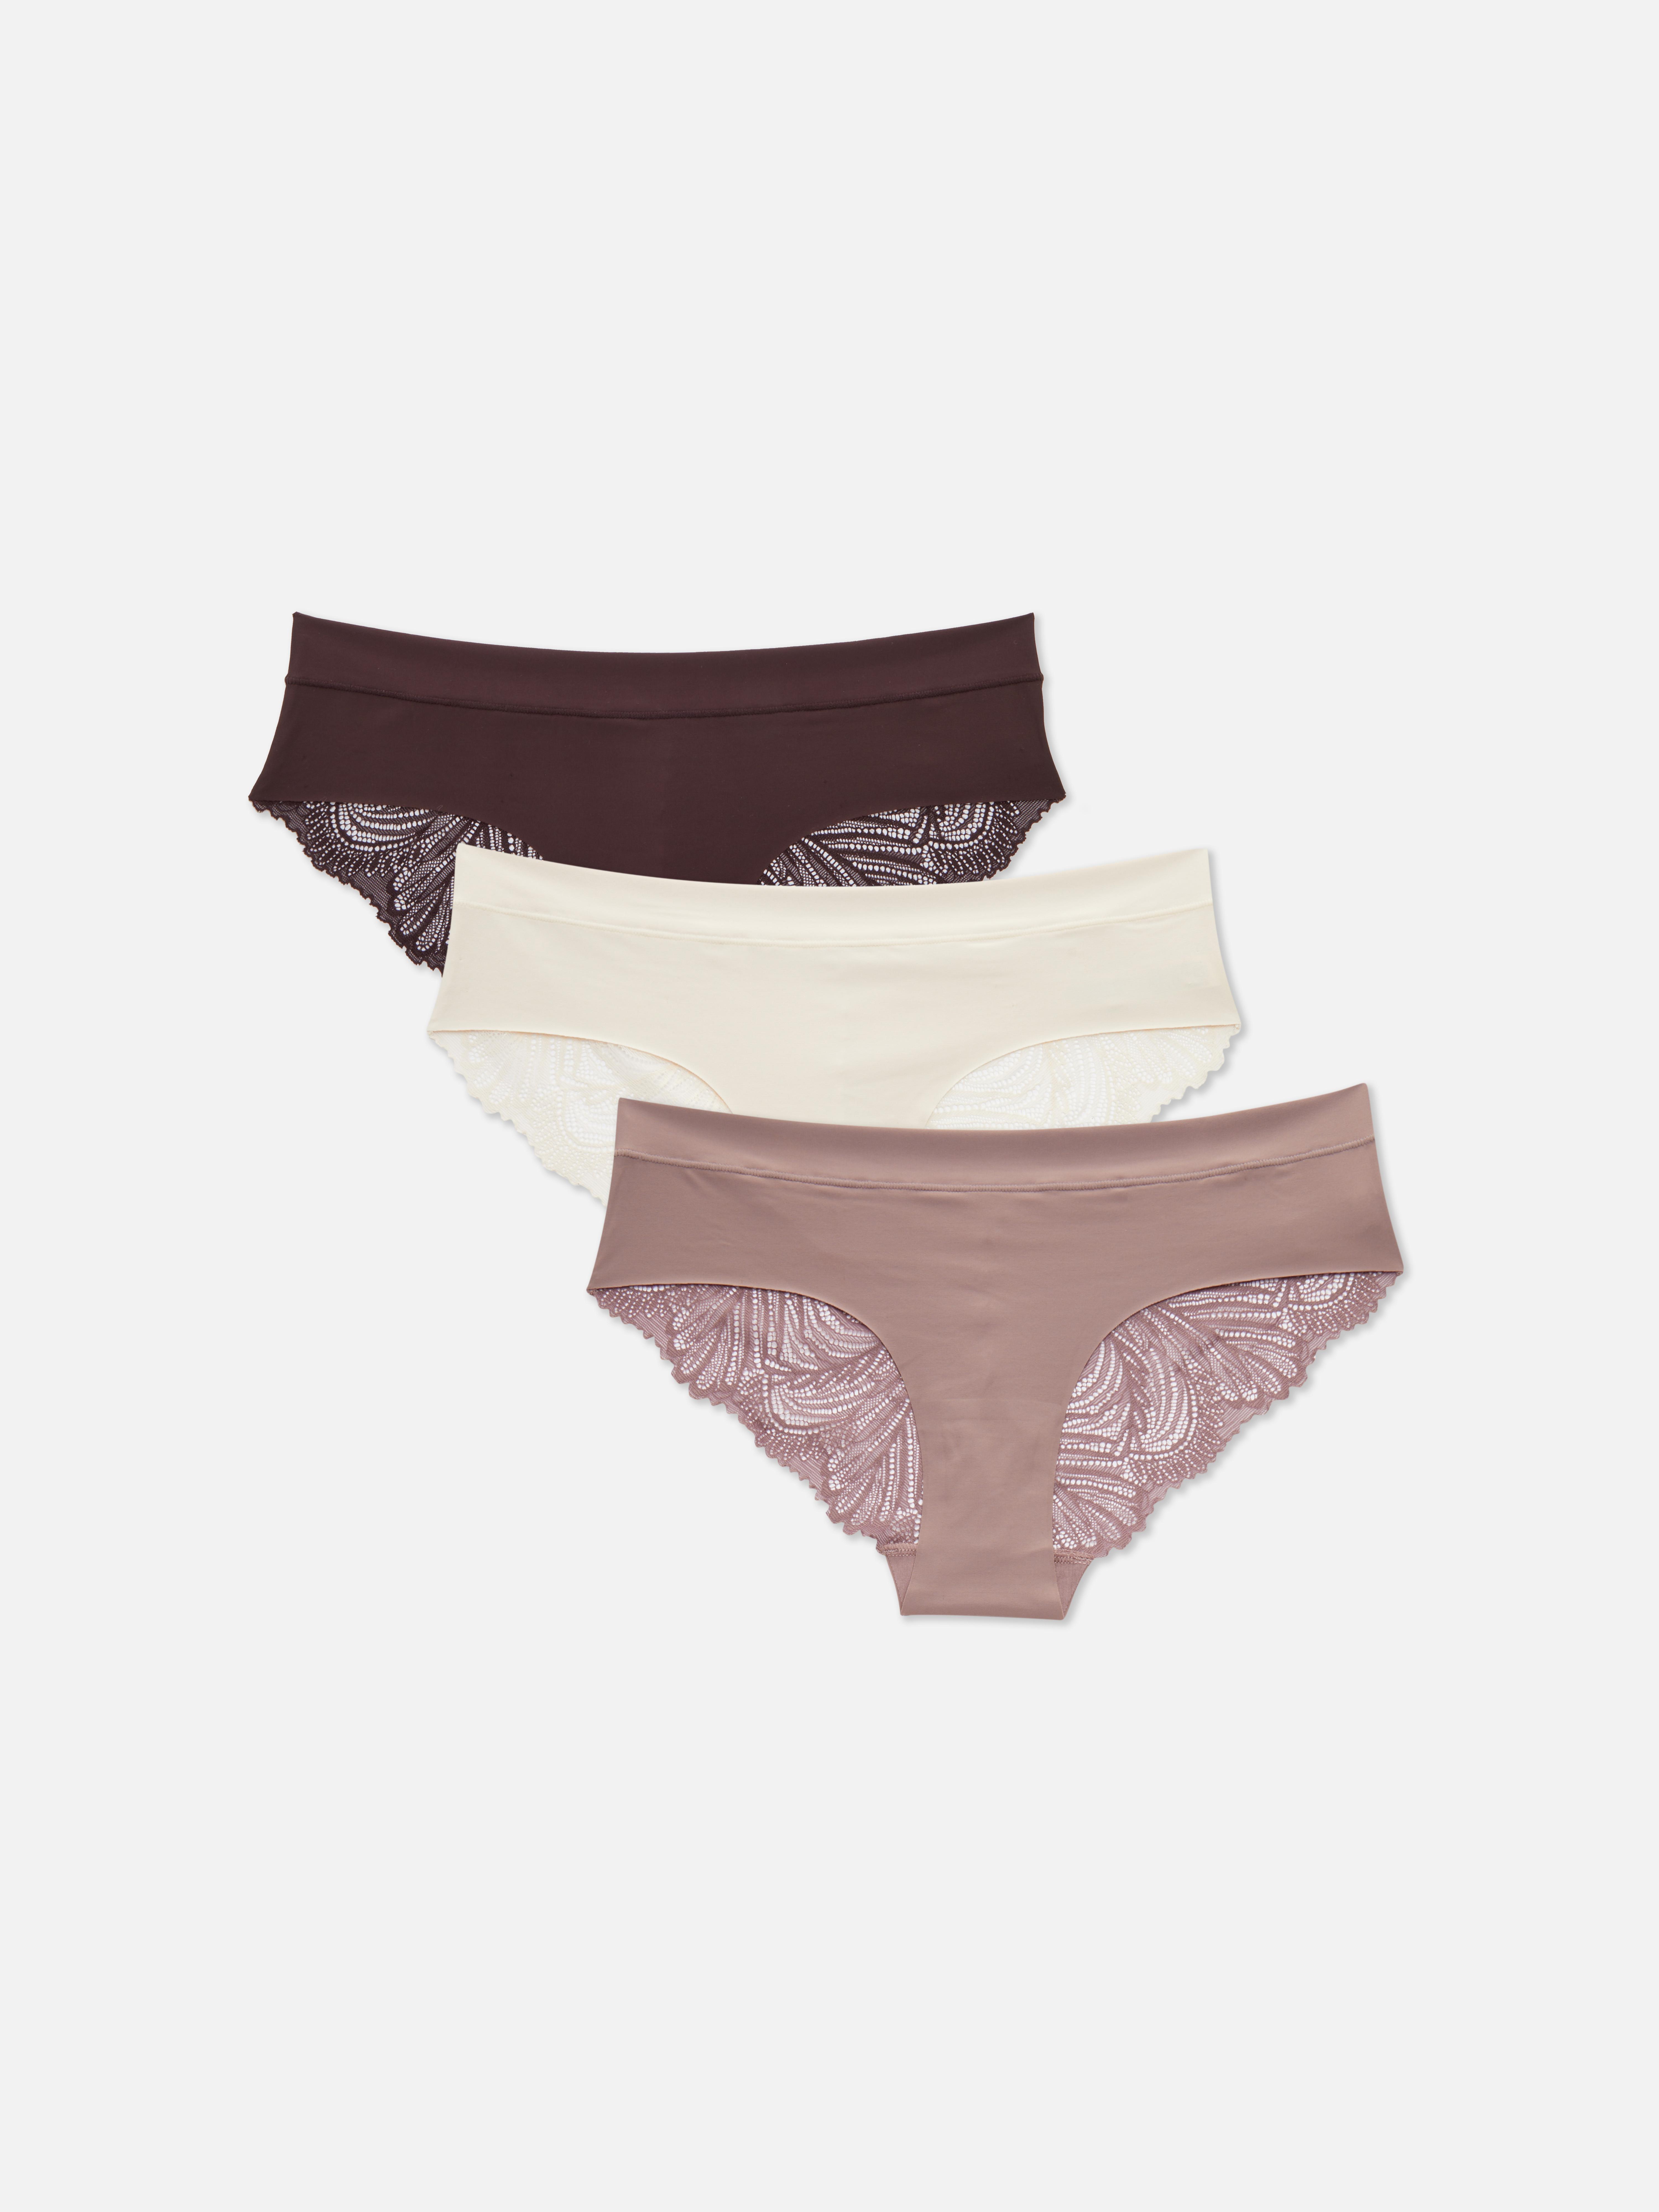 PRIMARK SECRET POSSESSIONS SILKY TOUCH KNICKERS BRAZILIAN PANTIES 3 PACK  M-XL